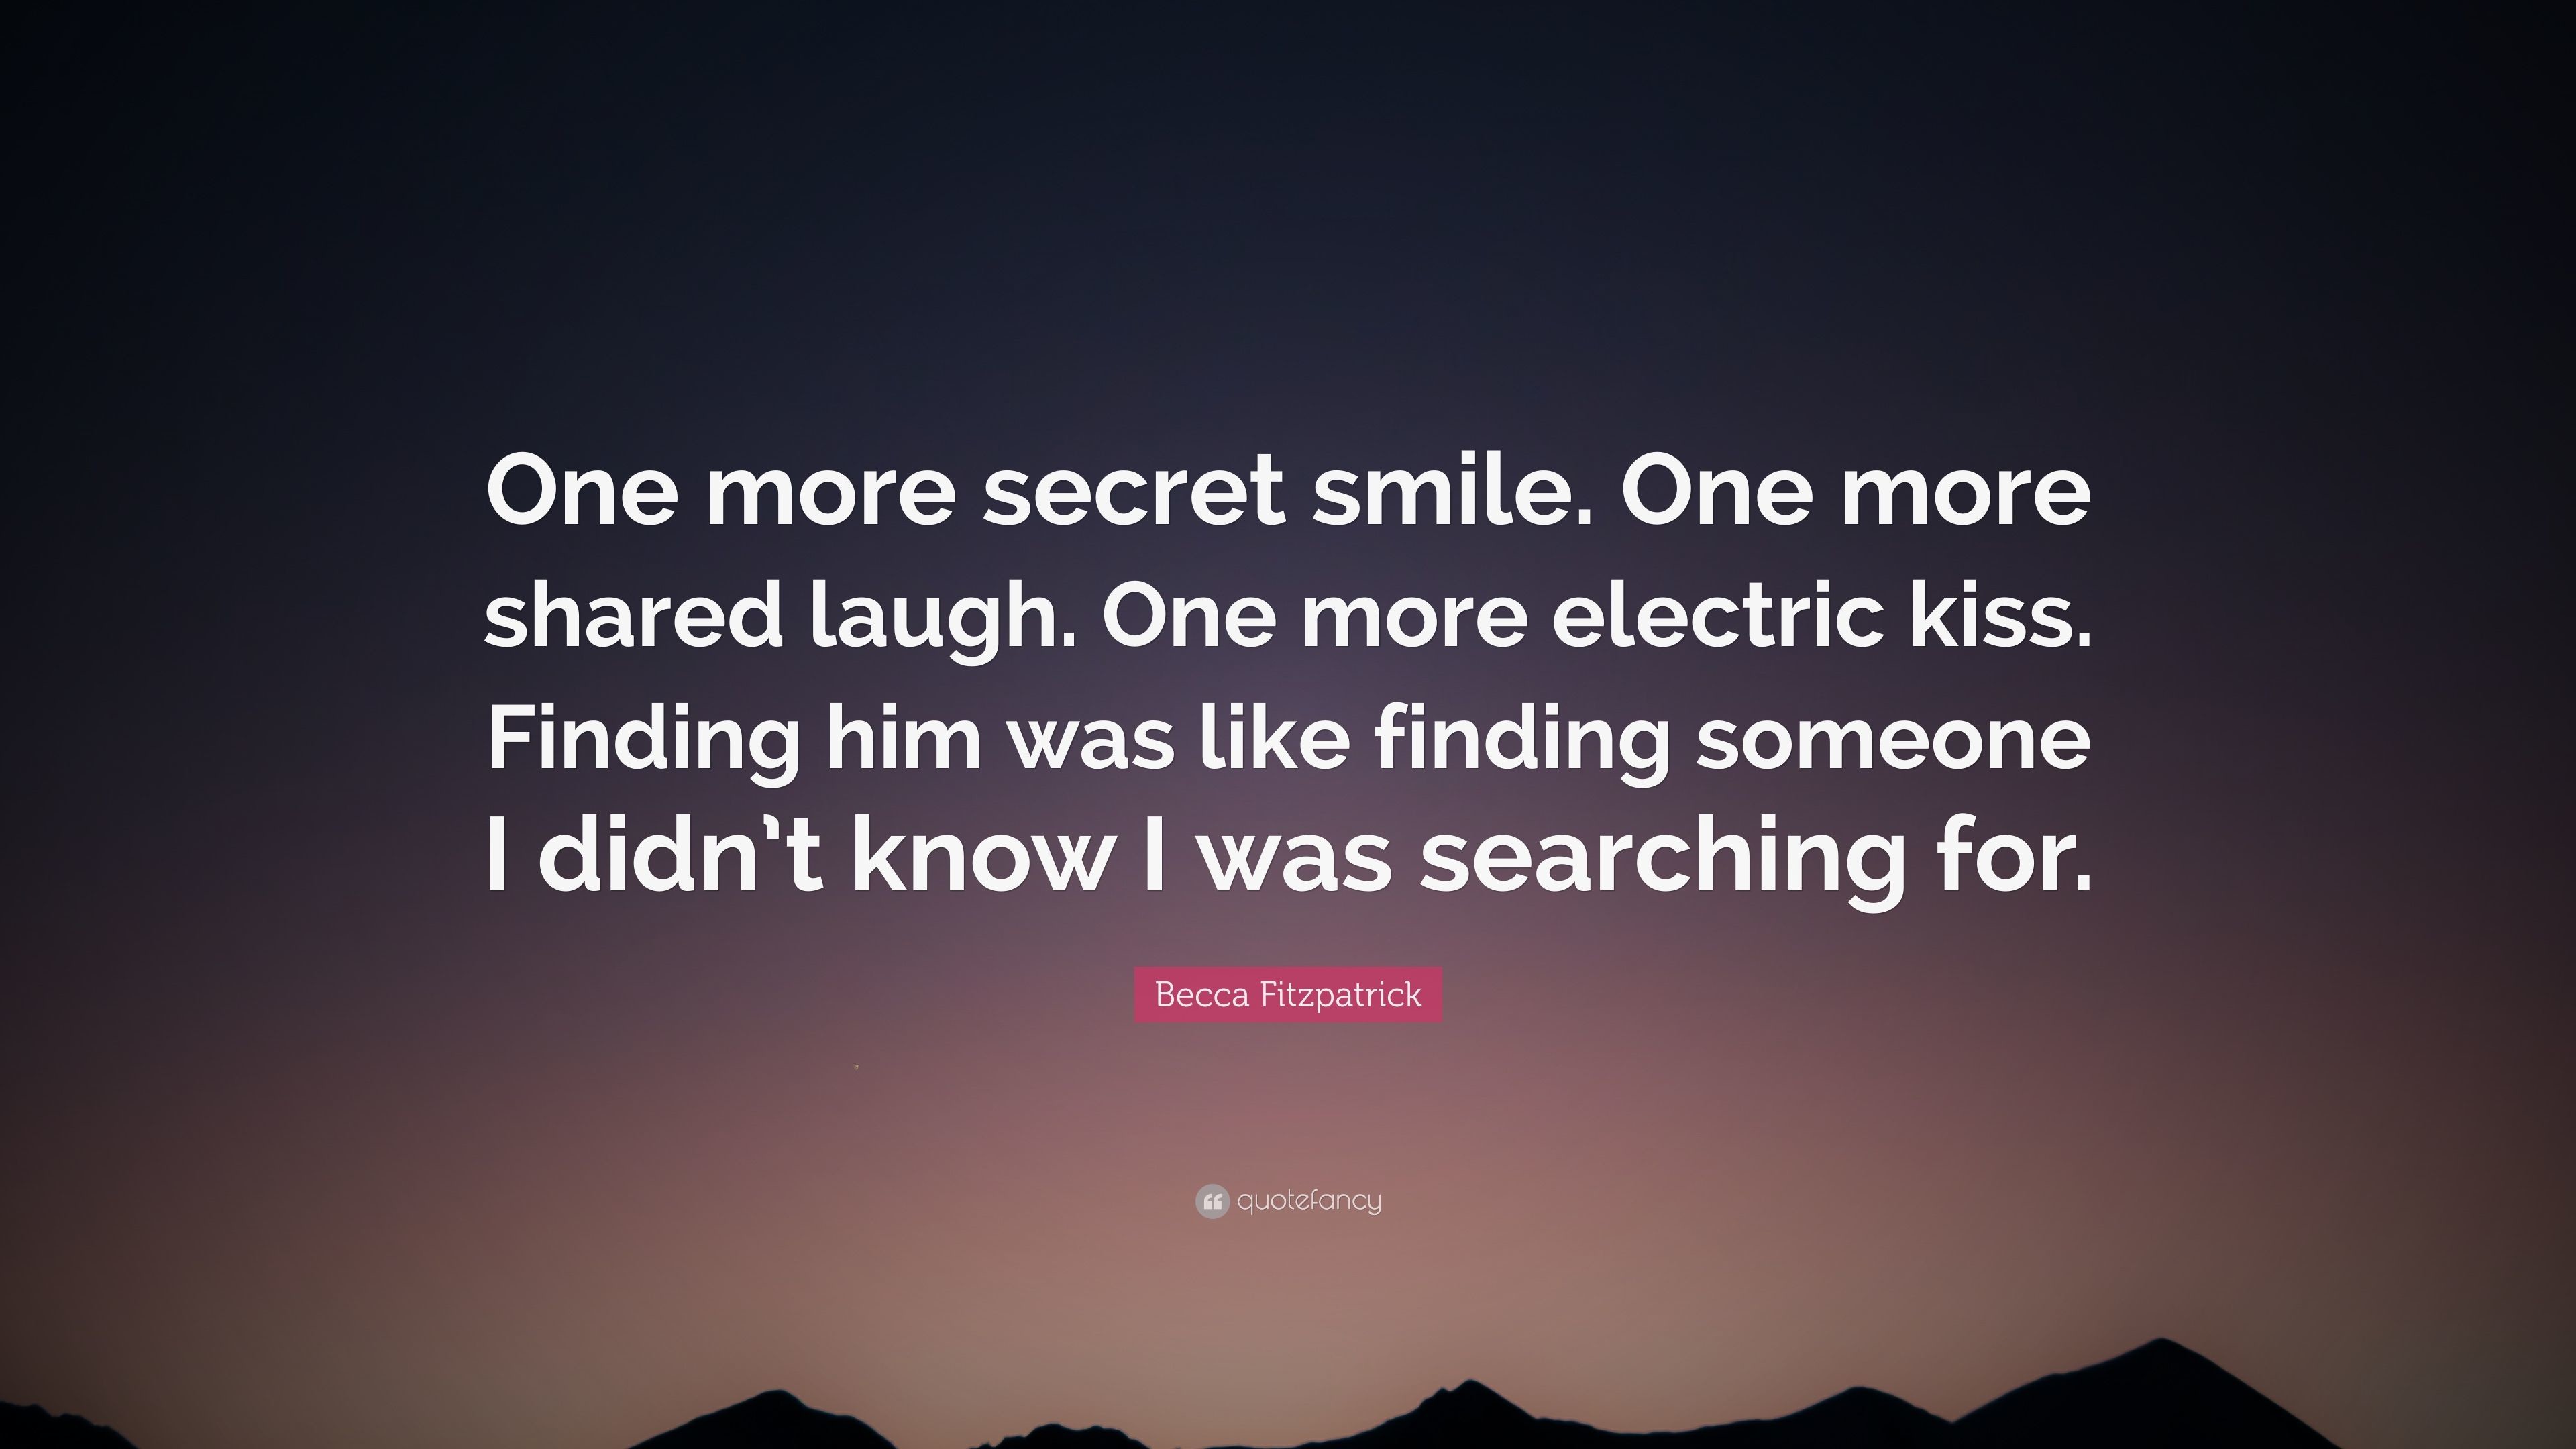 3840x2160 Becca Fitzpatrick Quote: “One more secret smile. One more shared laugh. One